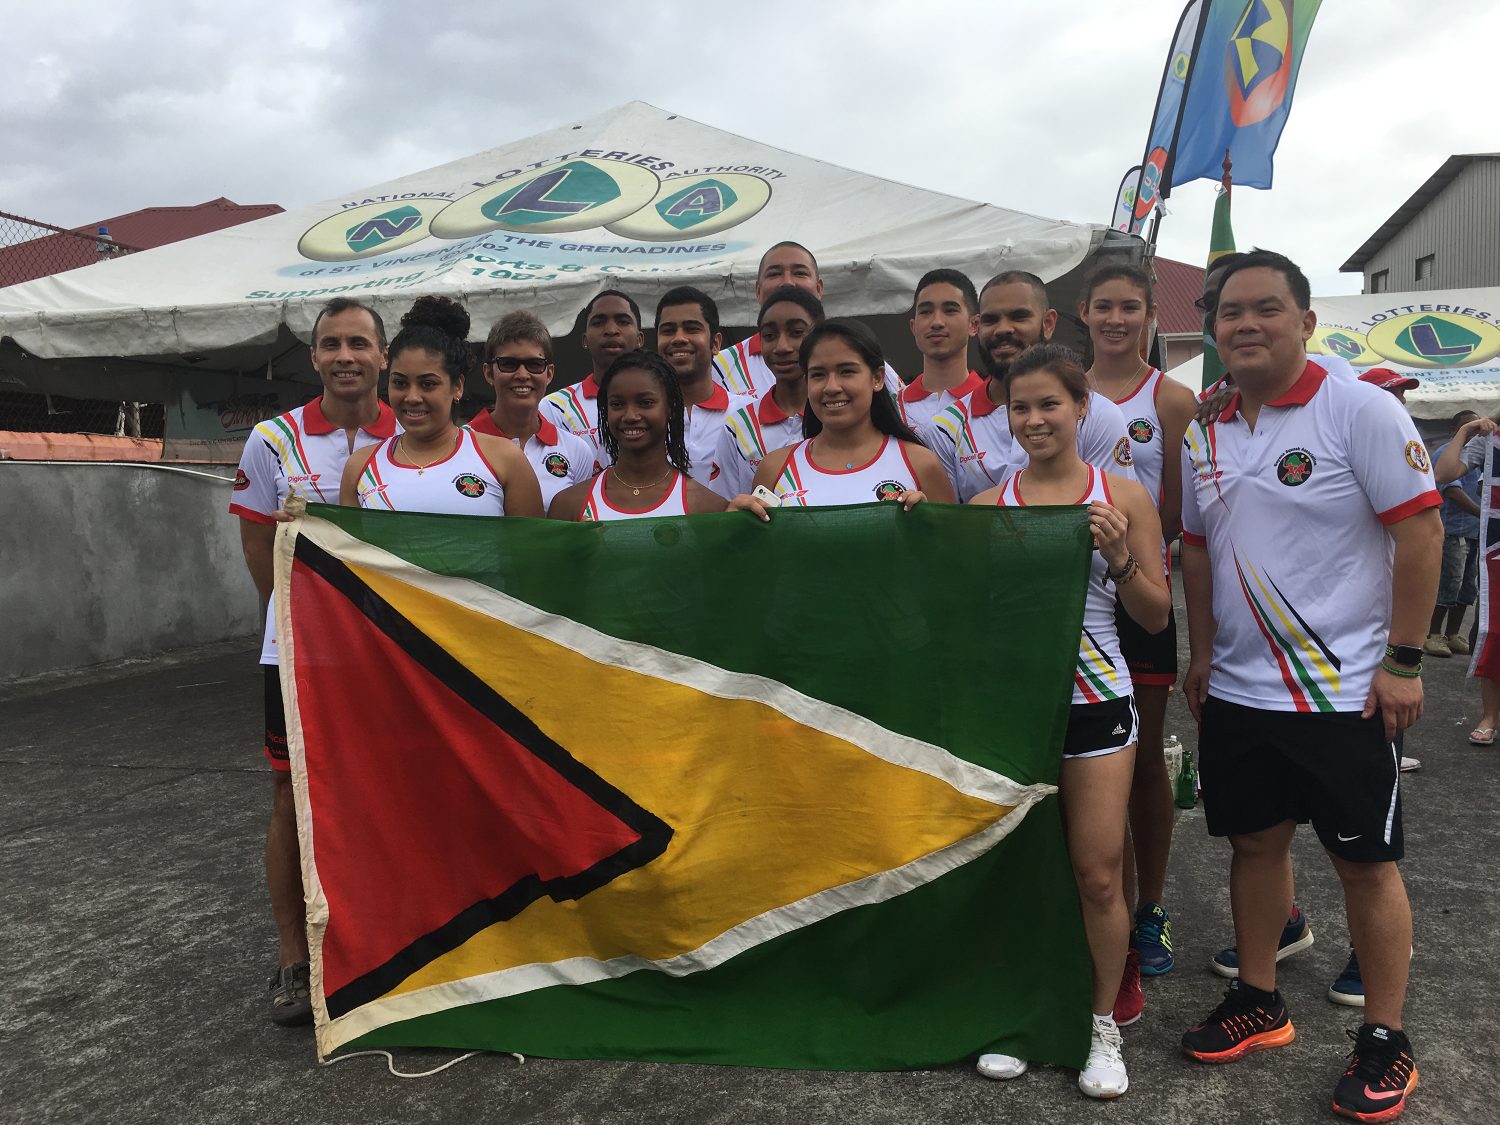 Guyana’s squash team at the XXV Senior Caribbean Squash Championships in St. Vincent and the Grenadines. Front row with the Guyana flag (left to right) Ashley Khalil, Larissa Wiltshire, Victoria Arjoon, Mary Fung-A-Fat, Second row (left to right) Richard Chin, Juanita Fernandes, Jason Ray Khalil, Shomari Wiltshire, Sunil Seth, Ramon Chan-A-Sue, Manager/Coach, Third row (left to right) Nyron Joseph, David Fernandes, Jean Claude Jeffrey, Taylor Fernandes, Alwyn Callender (partly hidden)





